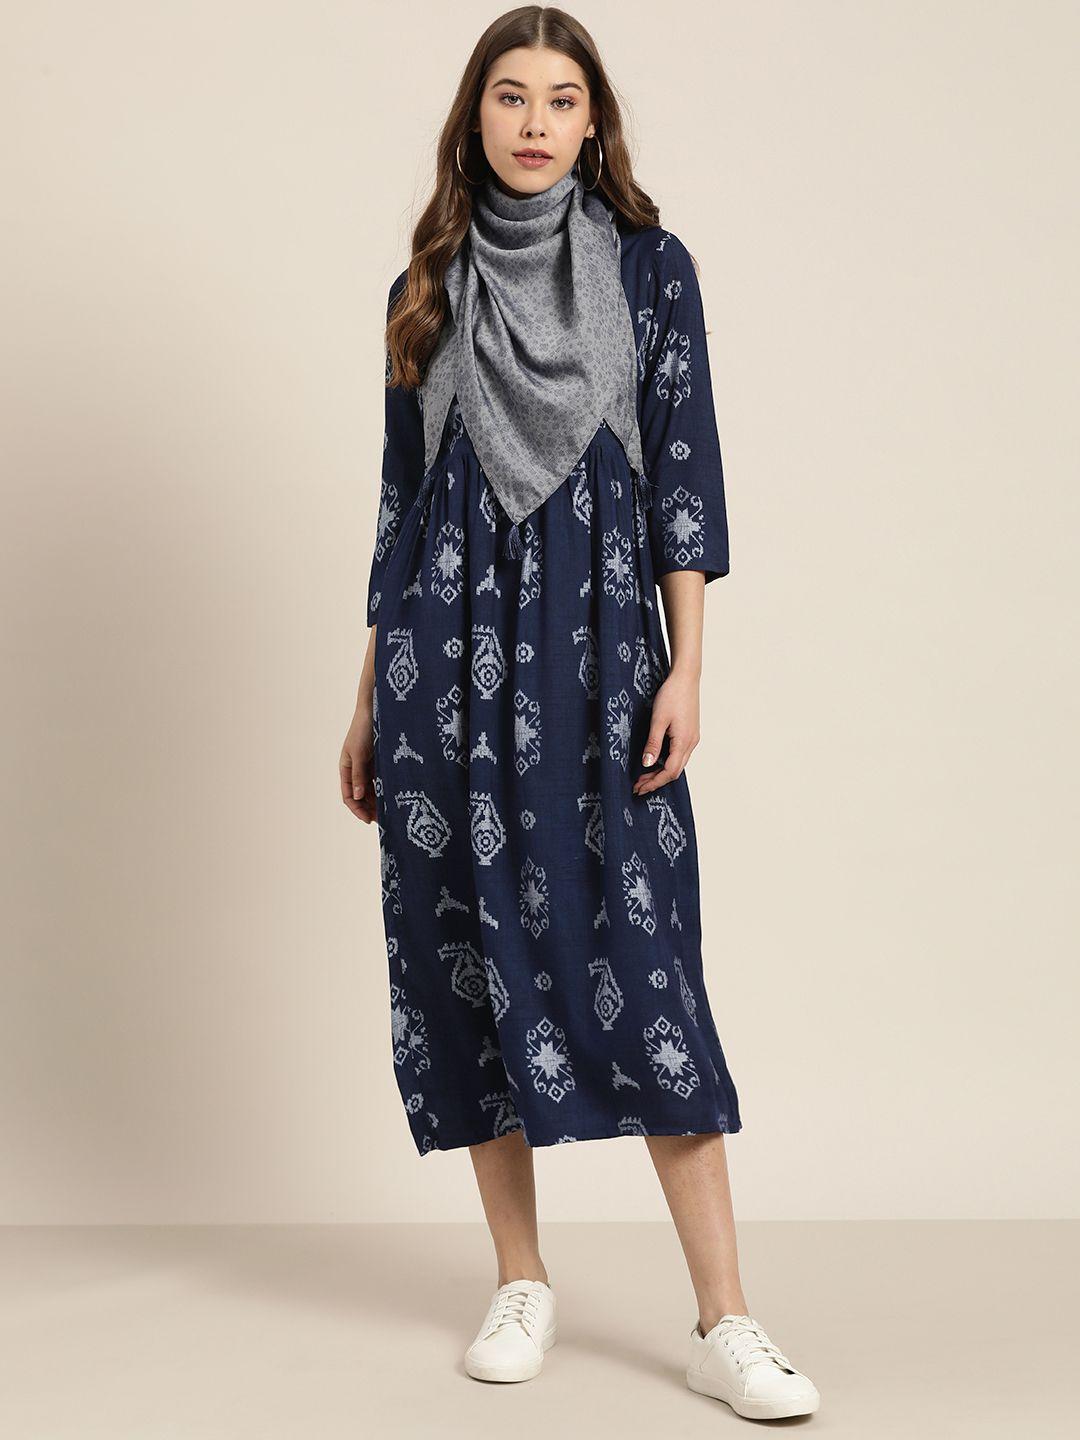 sangria women navy blue & grey printed a-line dress with stole